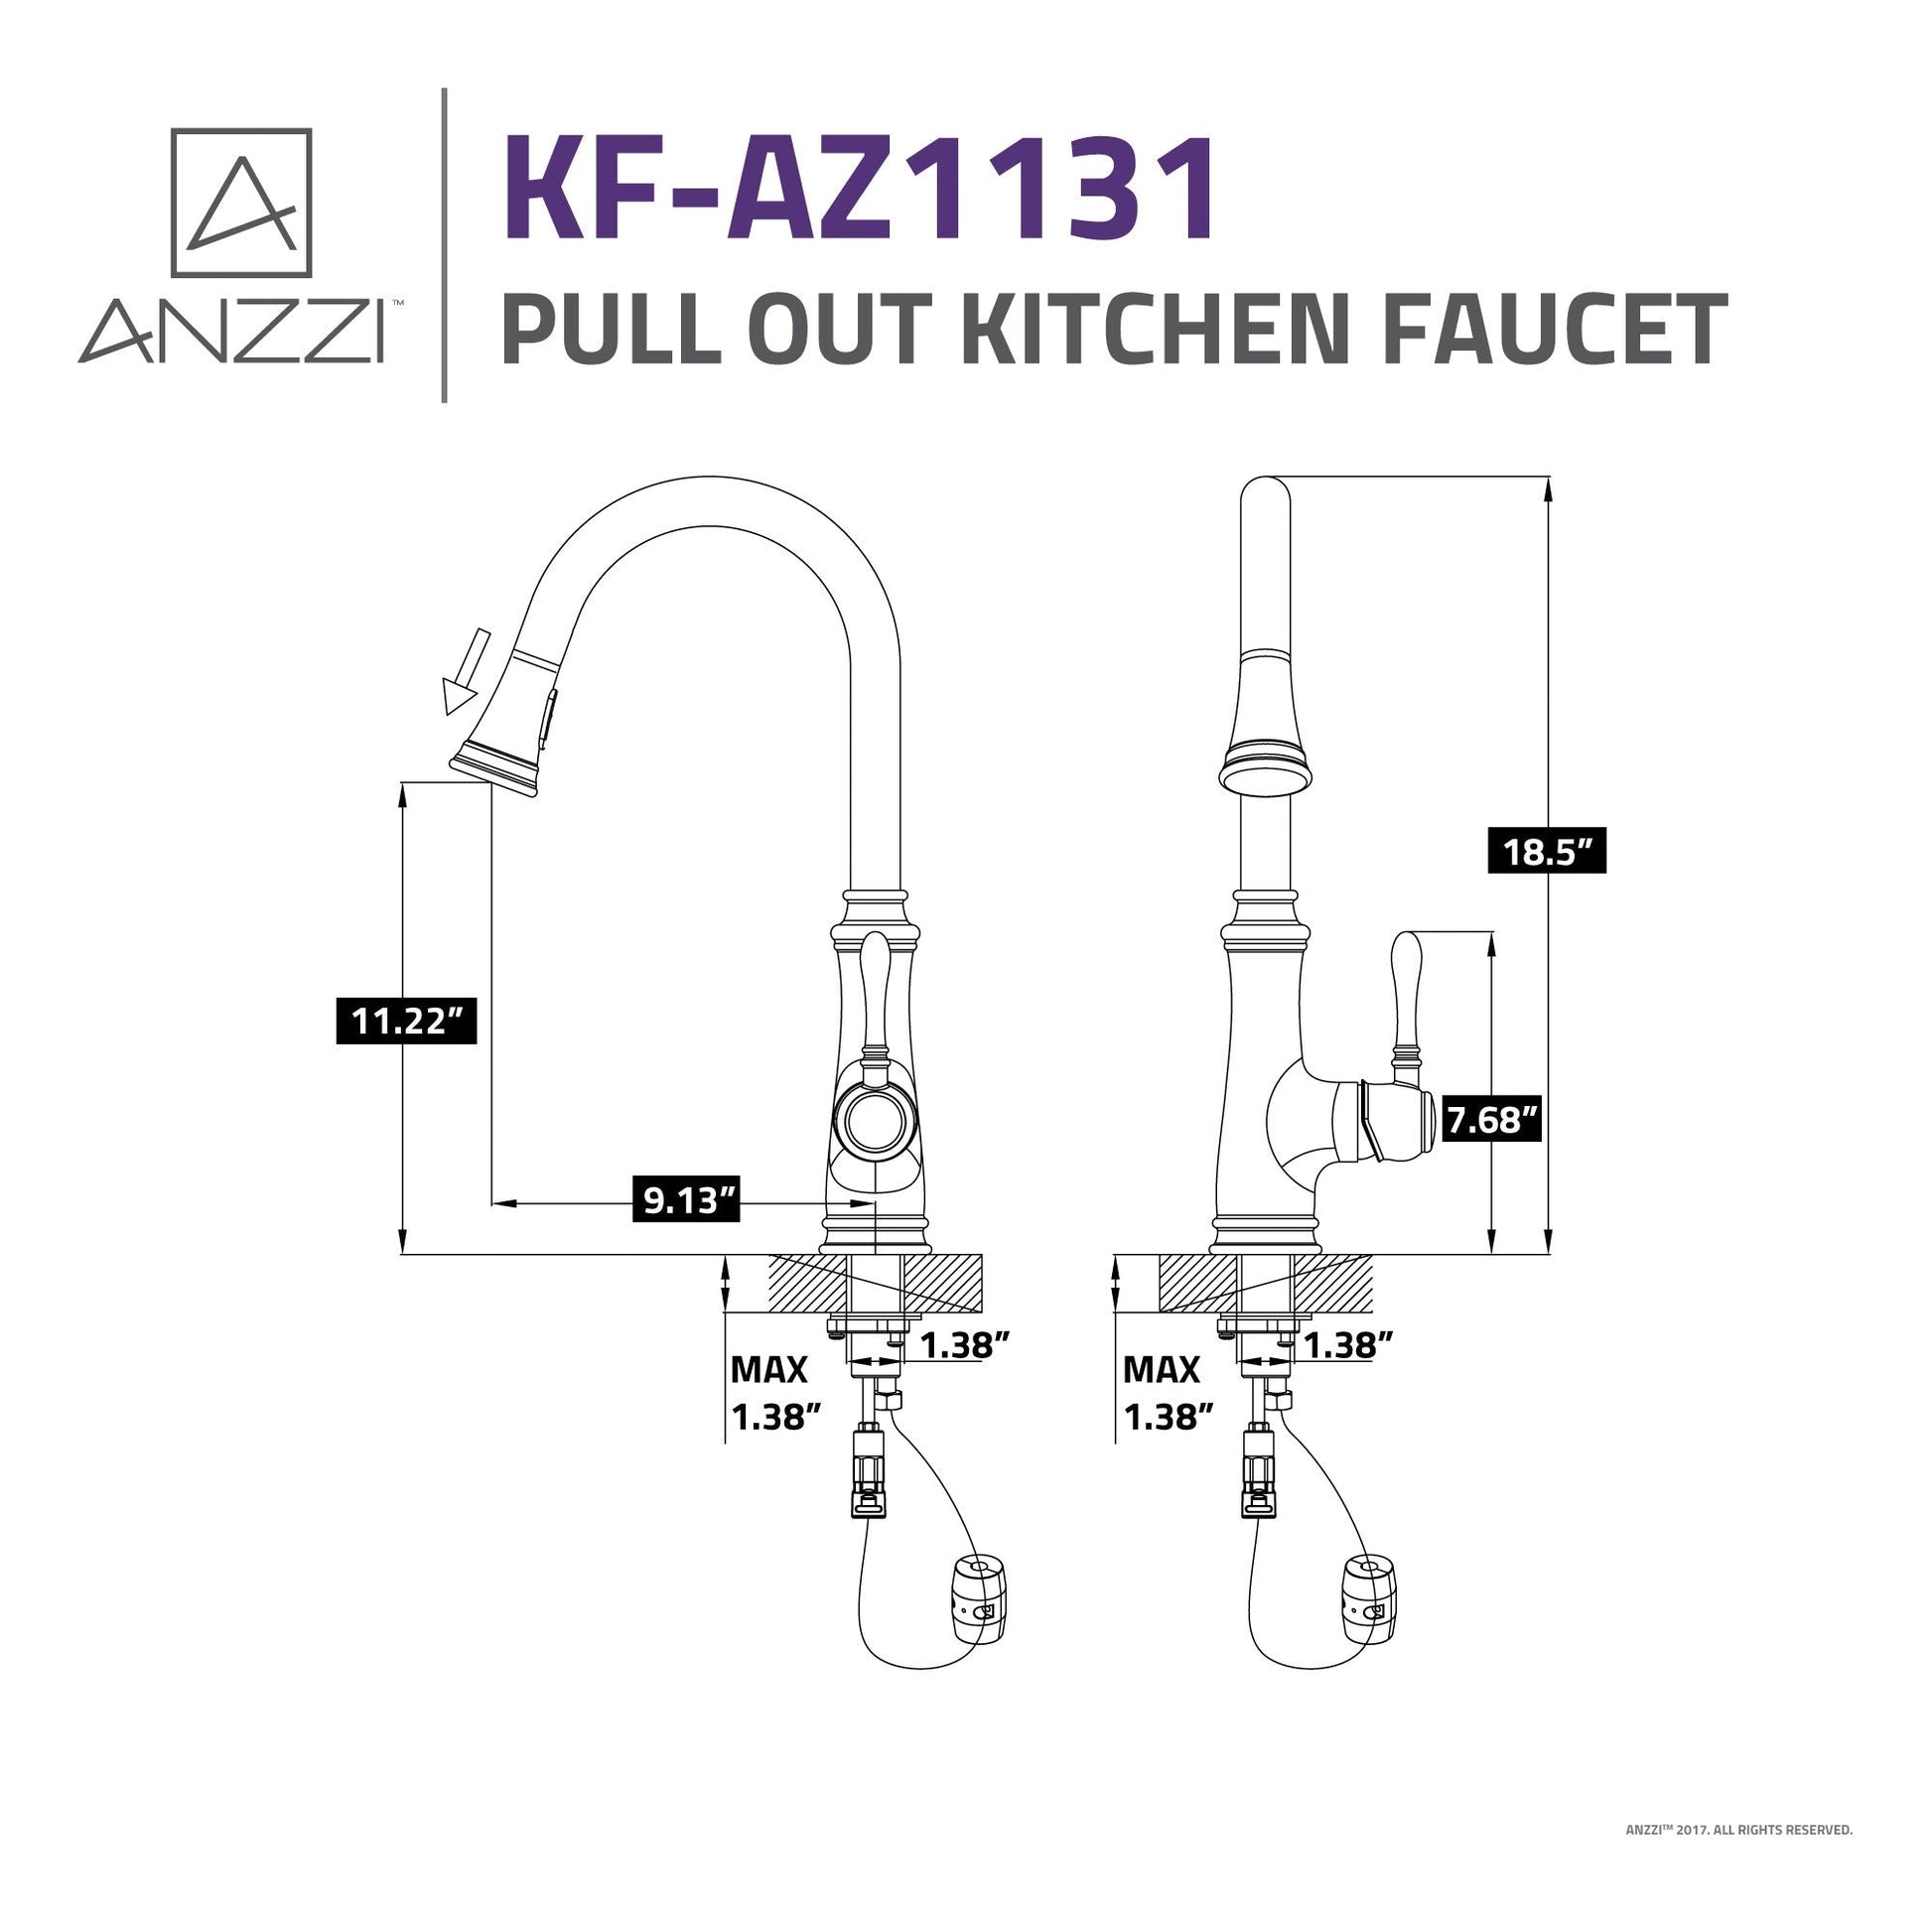 ANZZI Luna Series Single Hole Brushed Nickel Kitchen Faucet With Euro-Grip Pull Down Sprayer